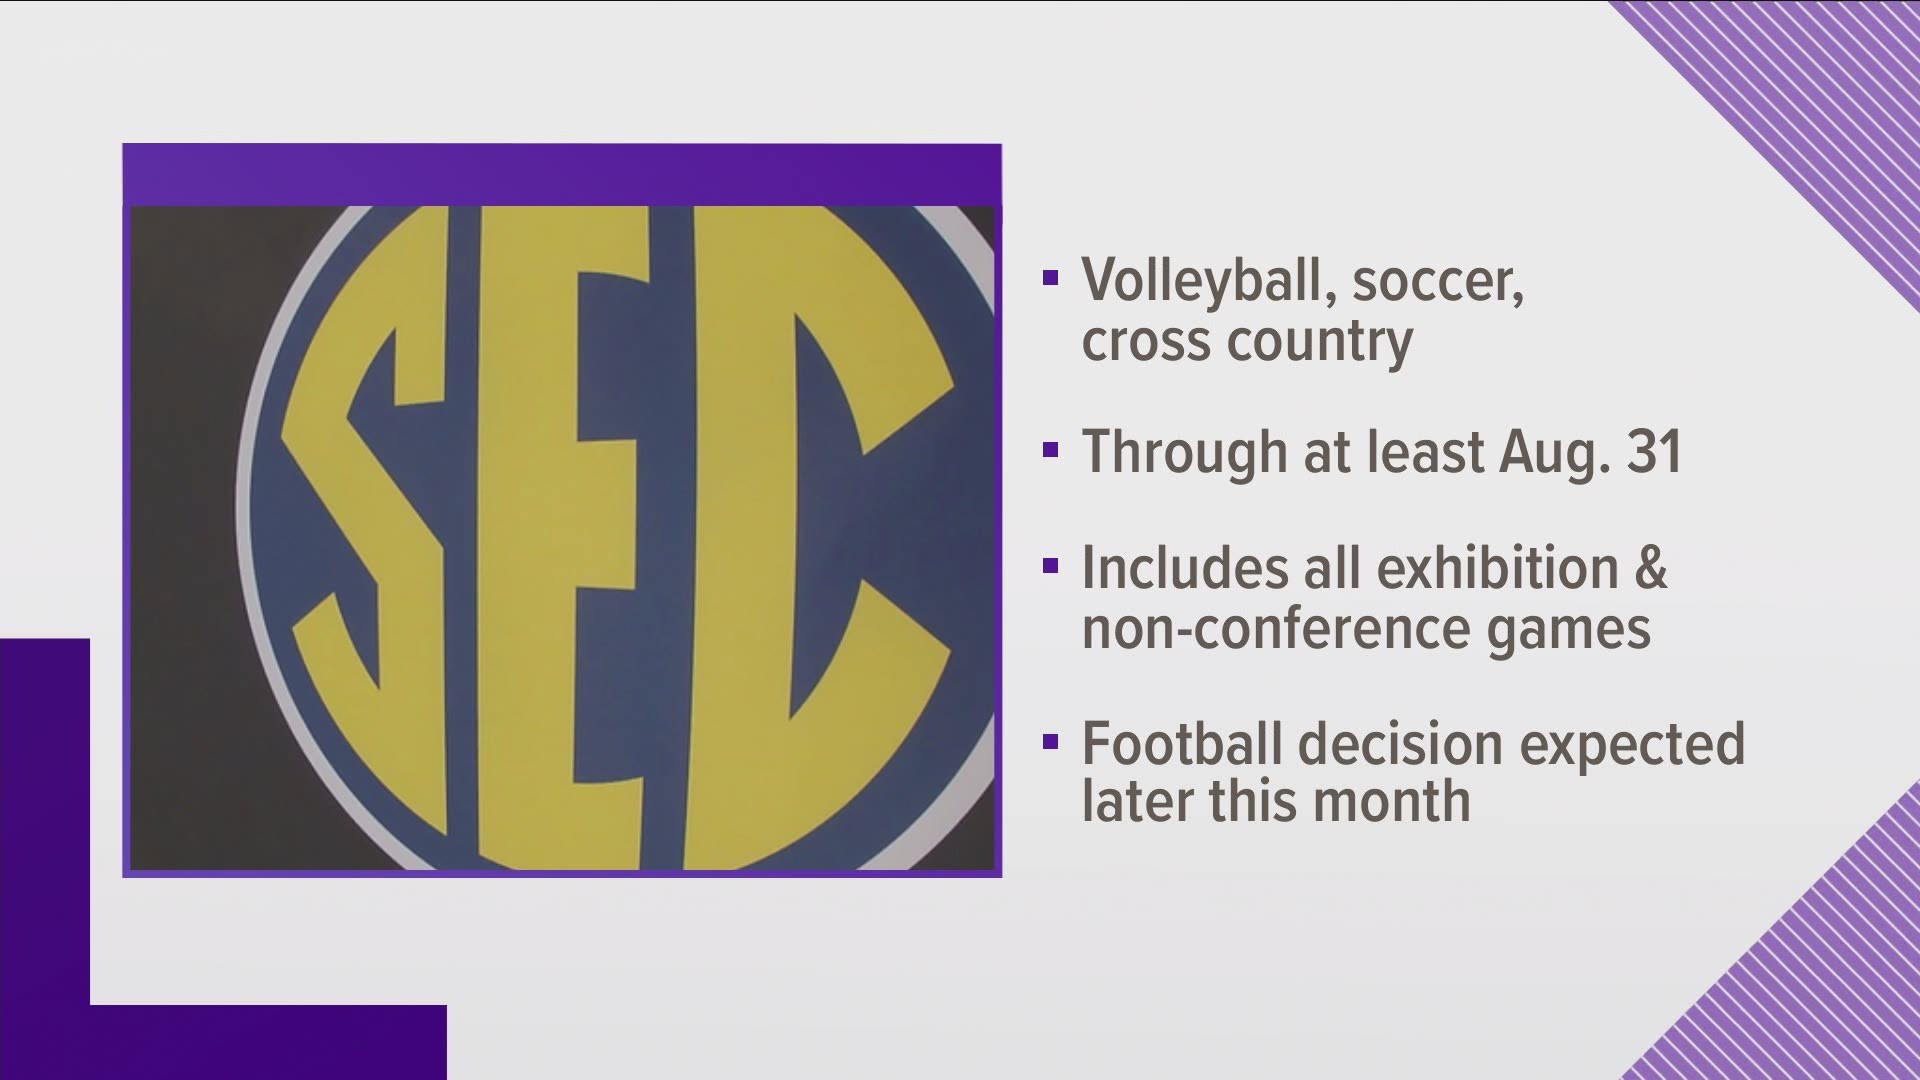 The SEC announced Tuesday it was delaying the start of some sports such as cross country and volleyball this summer.